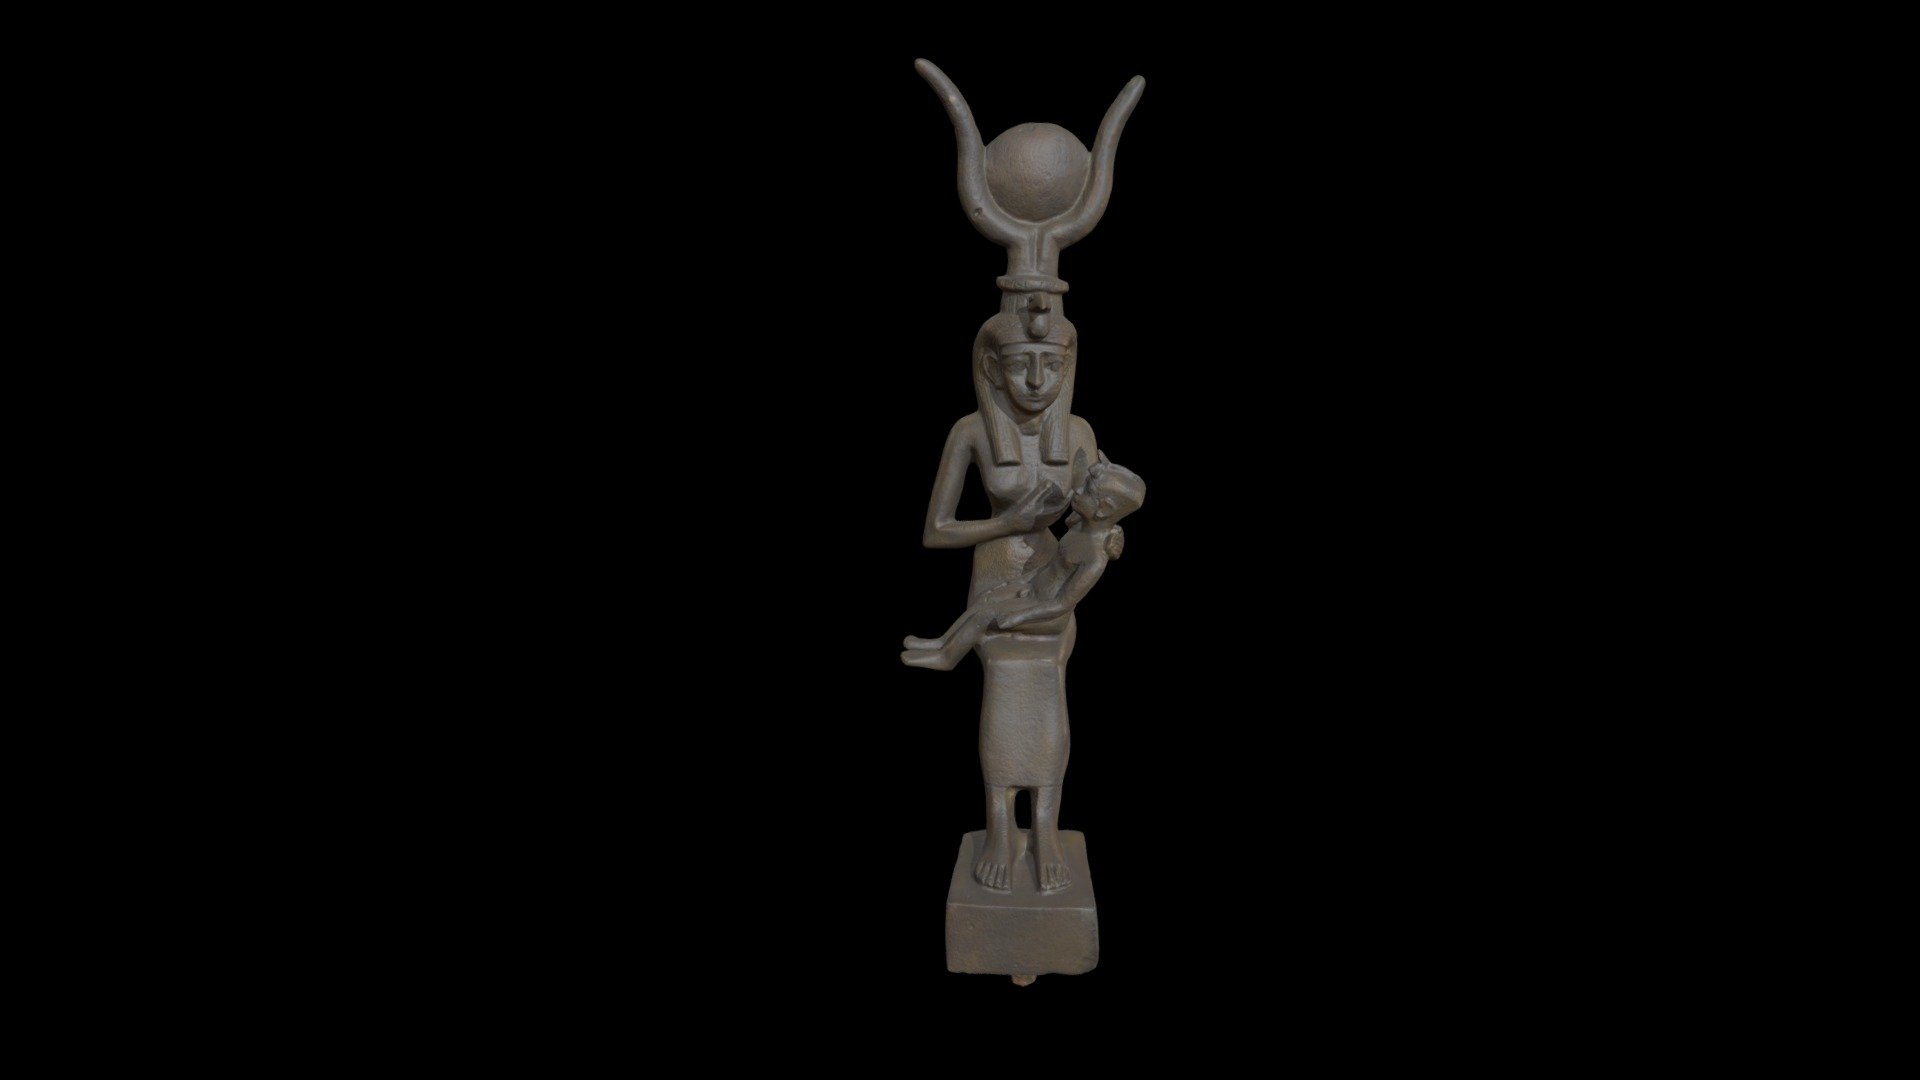 Egypt

Late Period, Dynasty 26, c. 688-252 BC

Copper Alloy

SM1931.3.10

Scanned by Andréa Martinez with the Artec Spider 3D Scanner - Seated Isis Figure with Child Horus - 3D model by Harvard Museum of the Ancient Near East (@hmane) 3d model